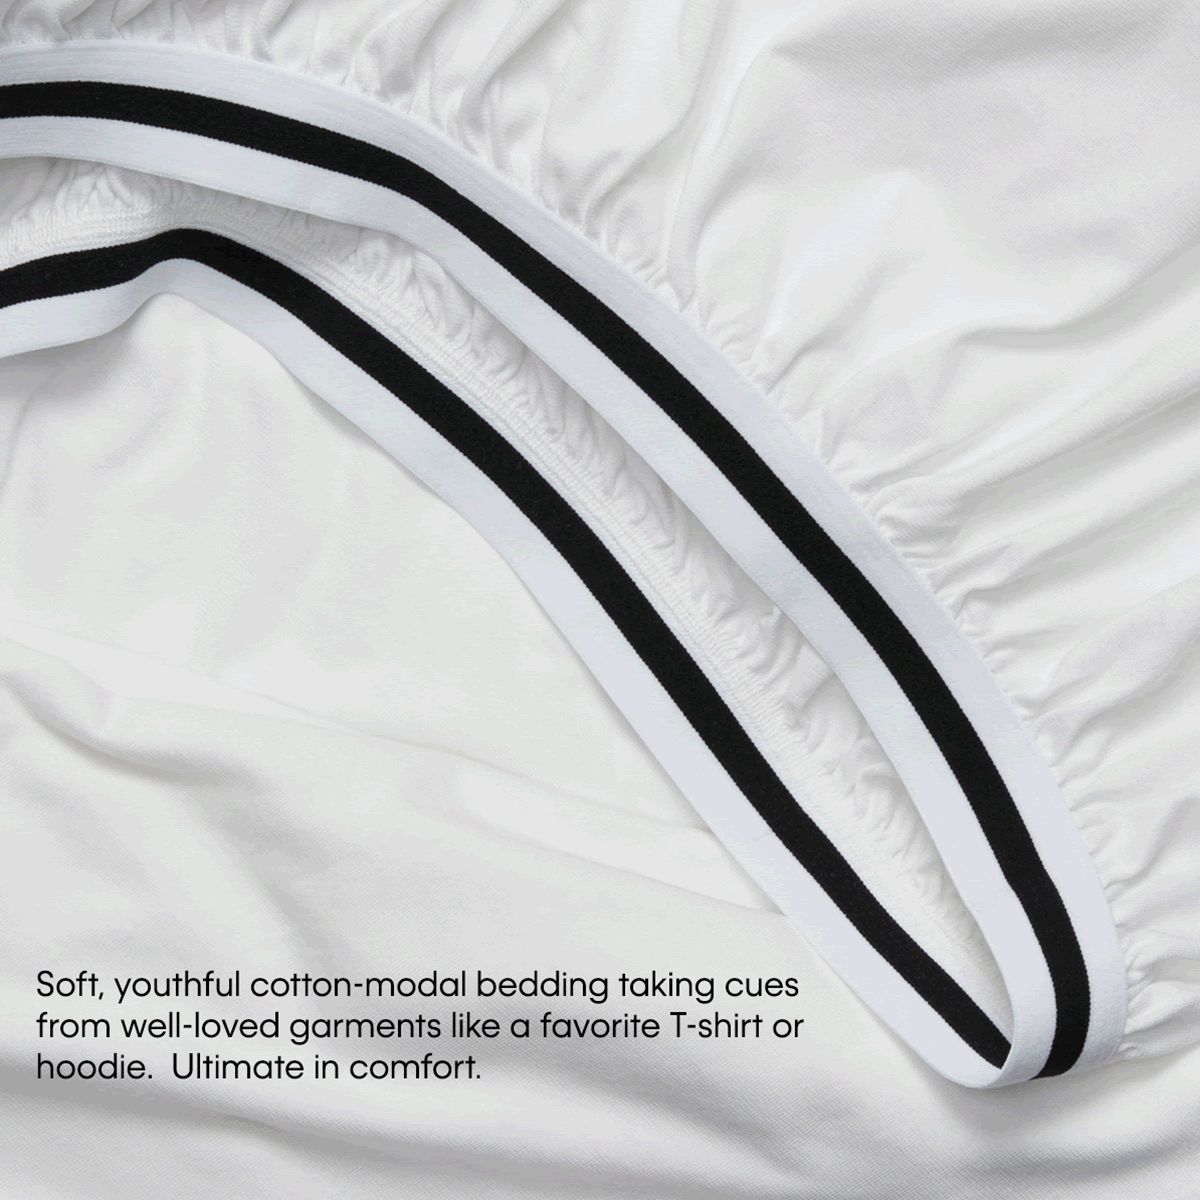 Soft, youthful cotton-modal bedding taking cues from well-loved garments like a favorite T-shirt or hoodie, Ultimate in comfort